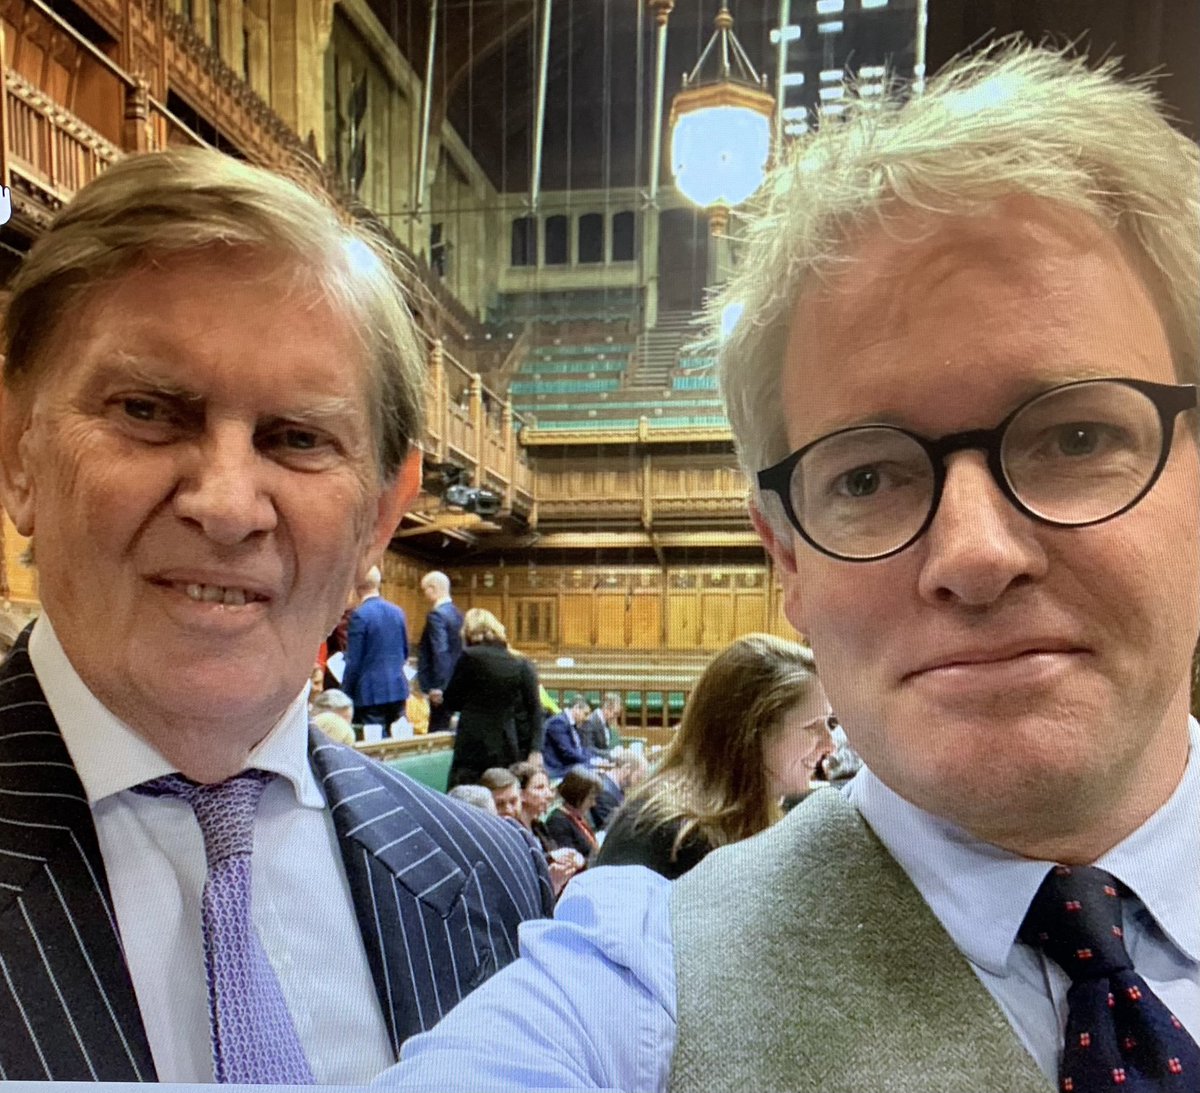 🏴‍☠️ This picture taken by Danny Kruger MP breaks Parliamentary rules about taking pictures in the chamber. Please don’t retweet it. dlvr.it/Sh6hJl